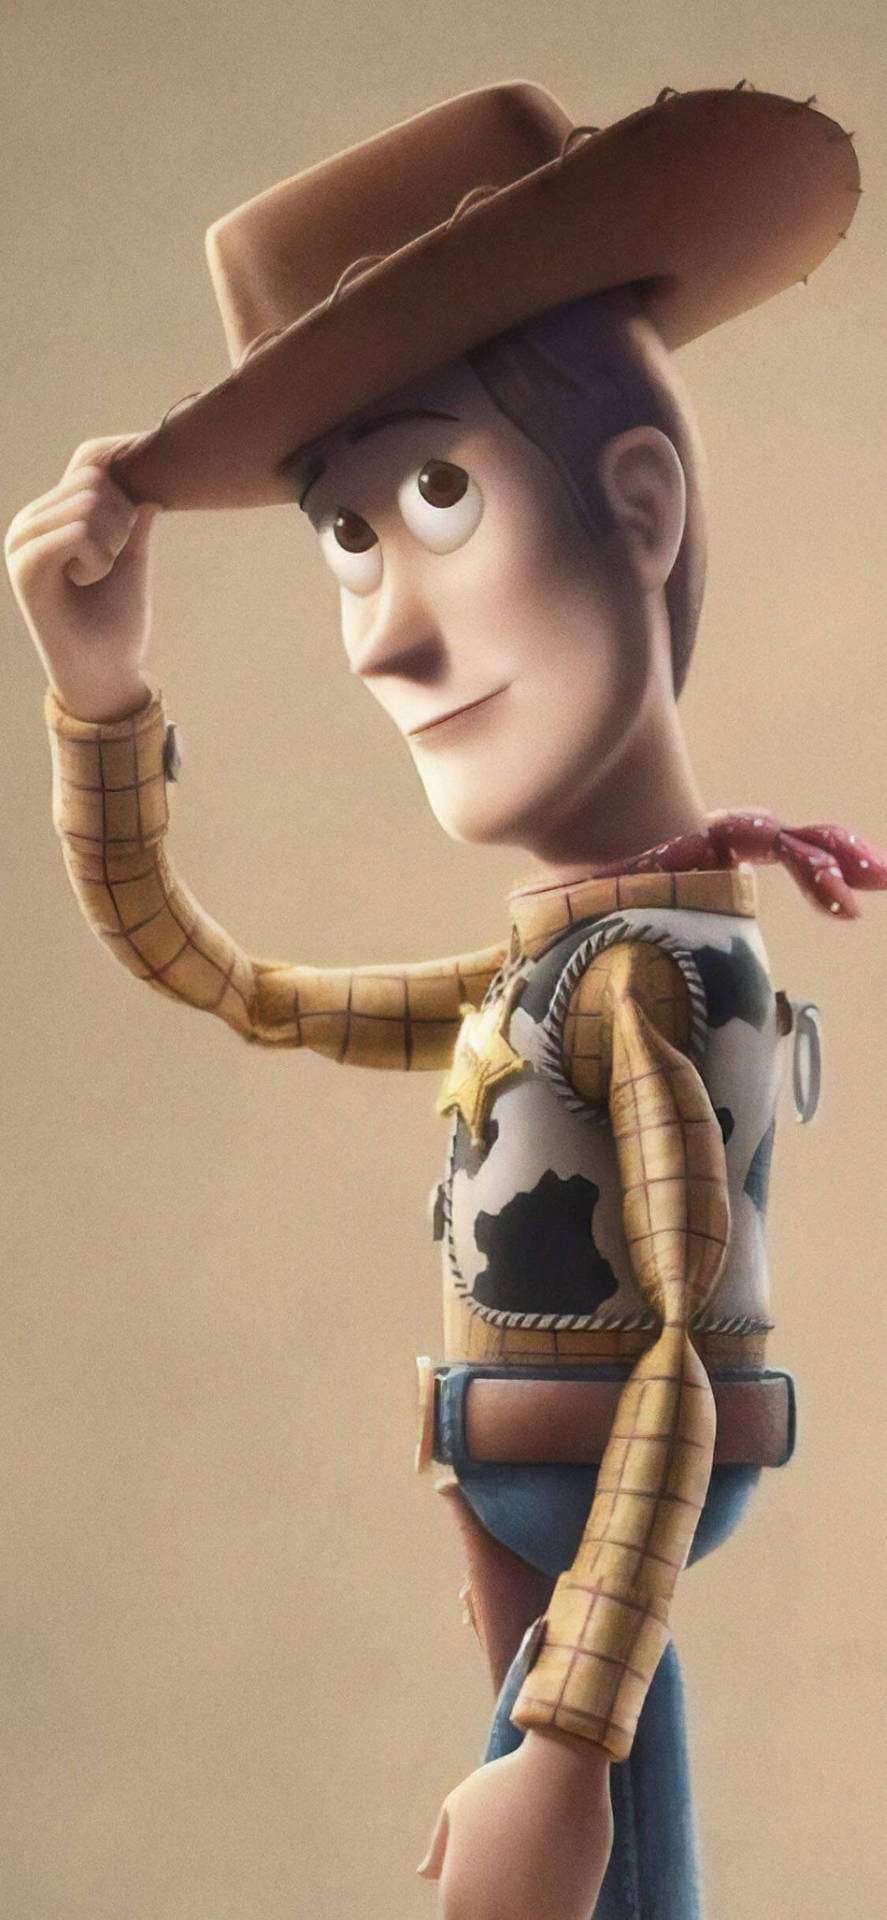 Toy Story Woody Iphone X Cartoon Background